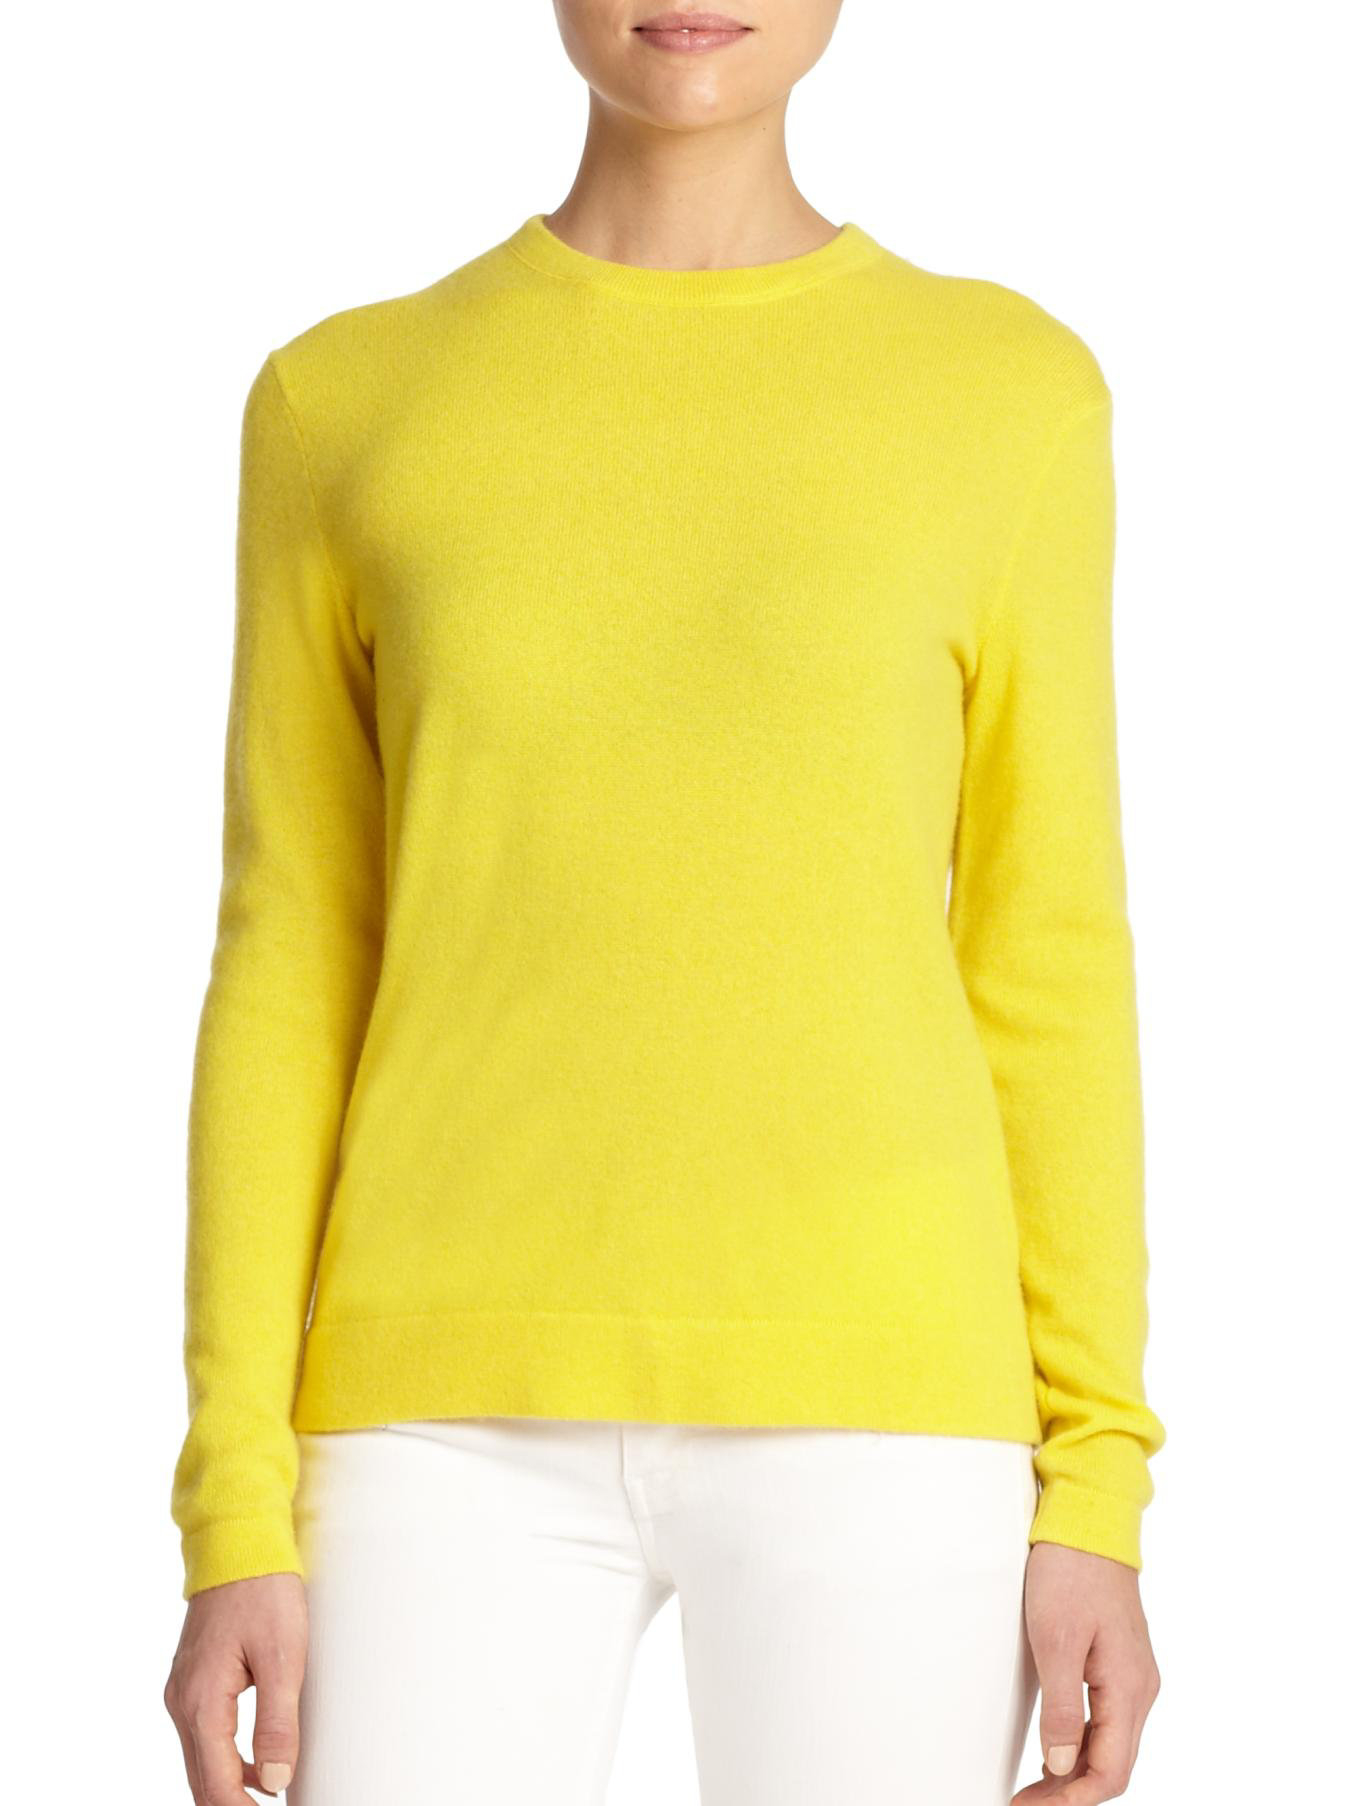 Polo Ralph Lauren Cashmere Crewneck Sweater in Canary Yellow (Yellow ...